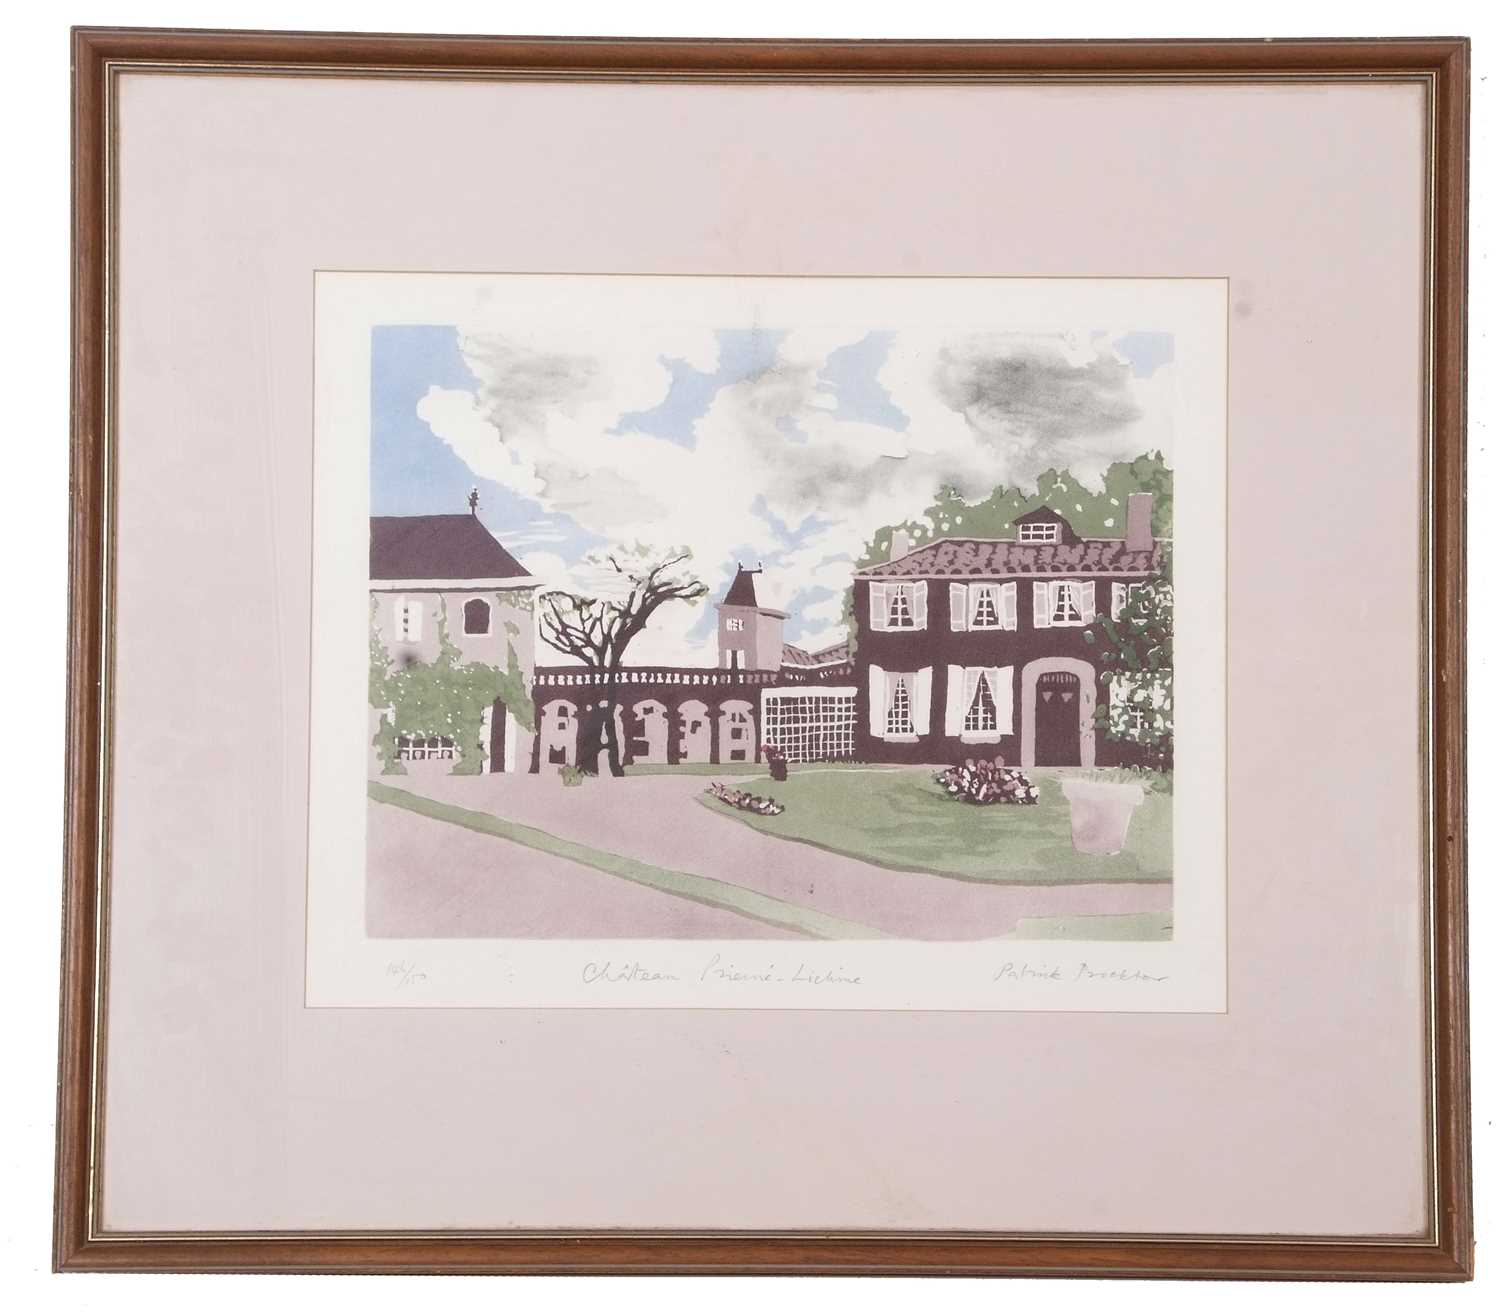 Patrick Procktor RA (British,1936-2003), 'Chateau Prieure Lichine', limited edition etching with